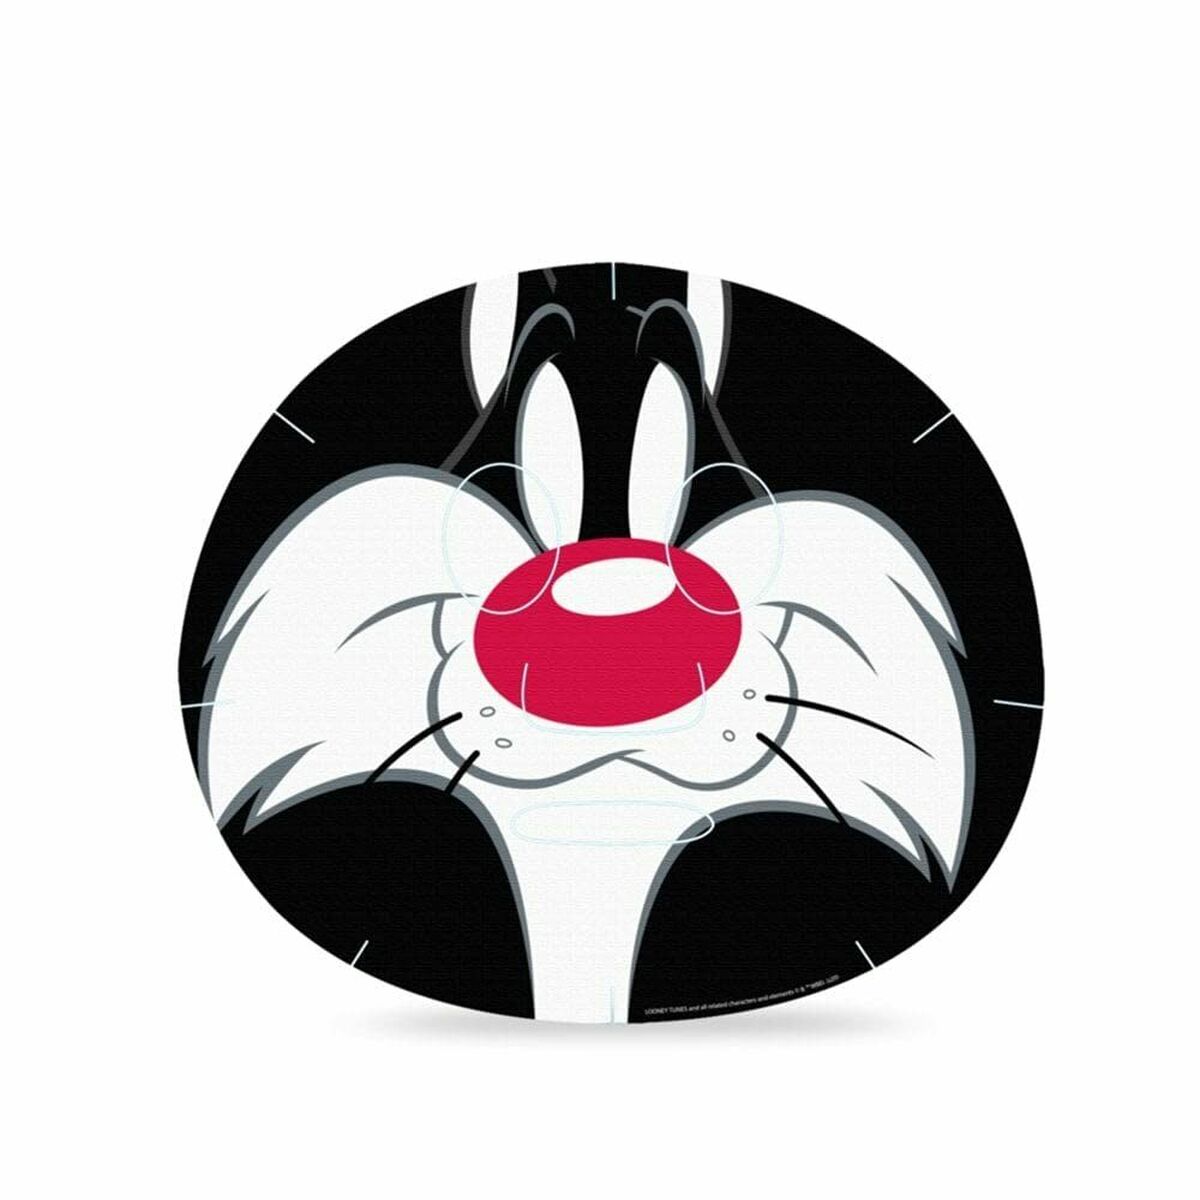 Gesichtsmaske Mad Beauty Looney Tunes Sylvester Passionsfrucht (25 ml)